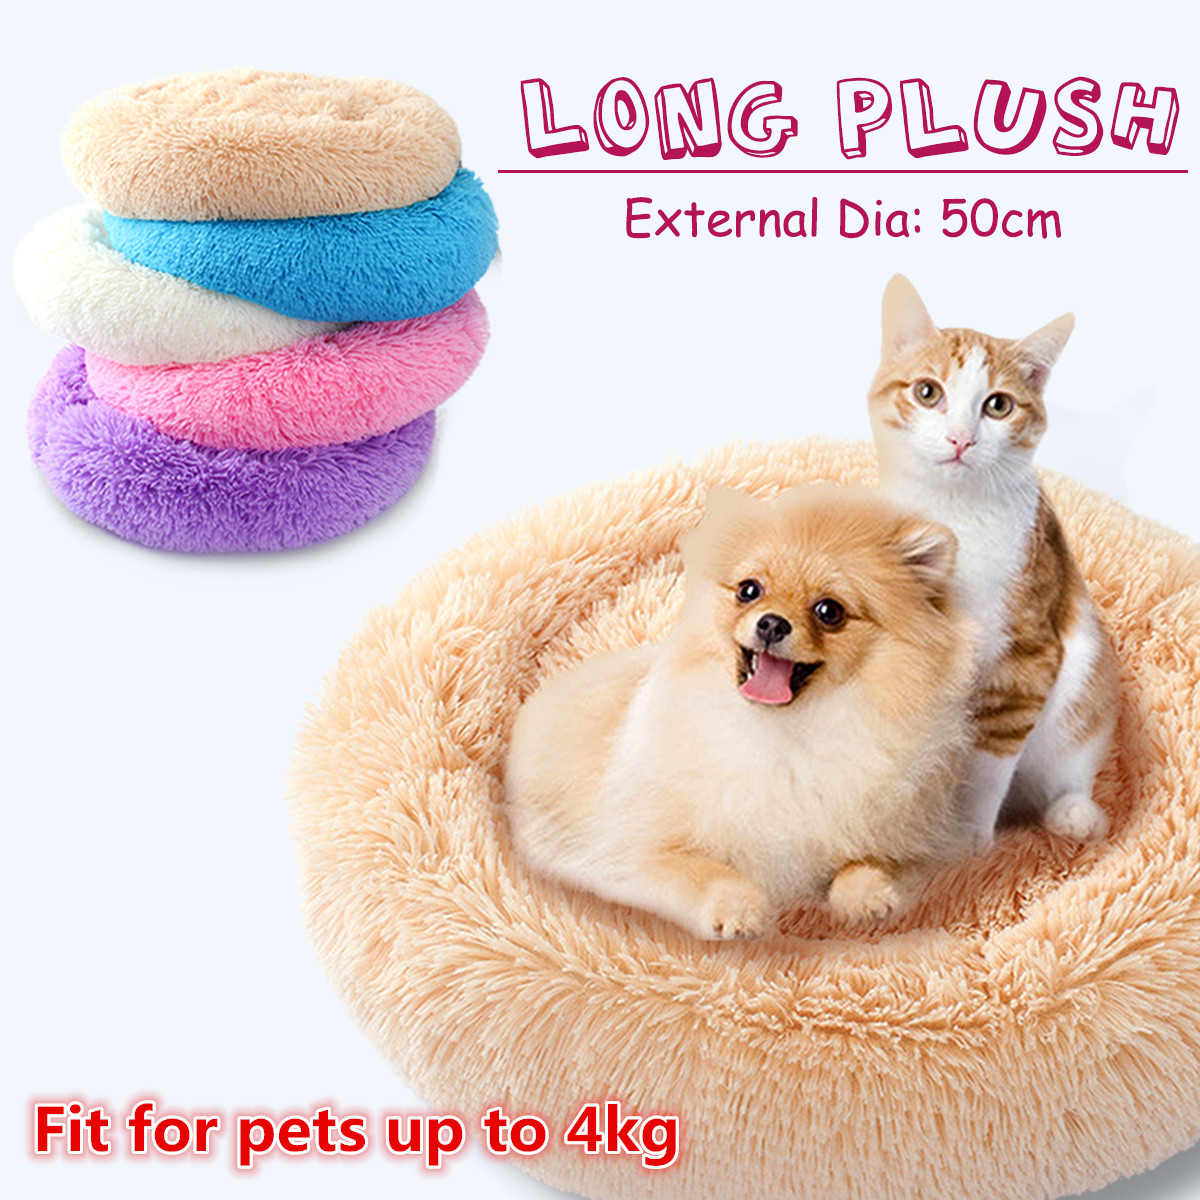 Soft-Puppy-Cat-Dog-Pet-Bed-Cave-Sleeping-House-Mat-Cushion-Warm-Washable-Pet-Supplies-Home-1631364-1